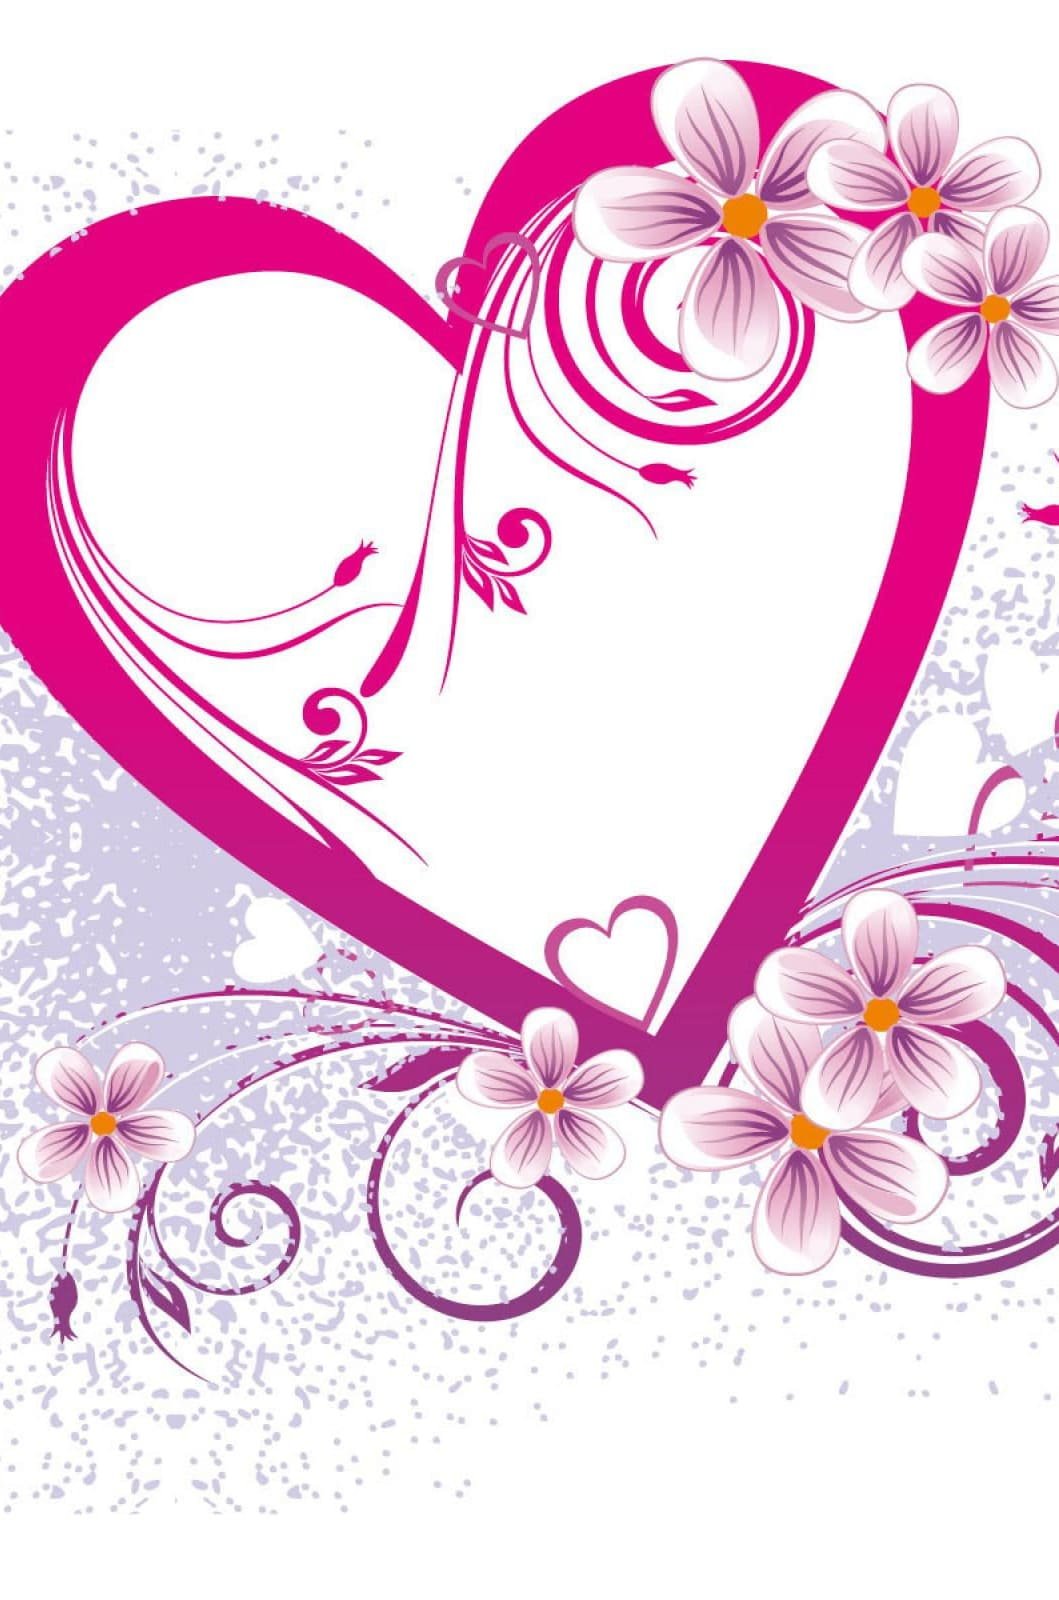 hdwallpaper valentines day images Love Heart With White Background heart and love artwork